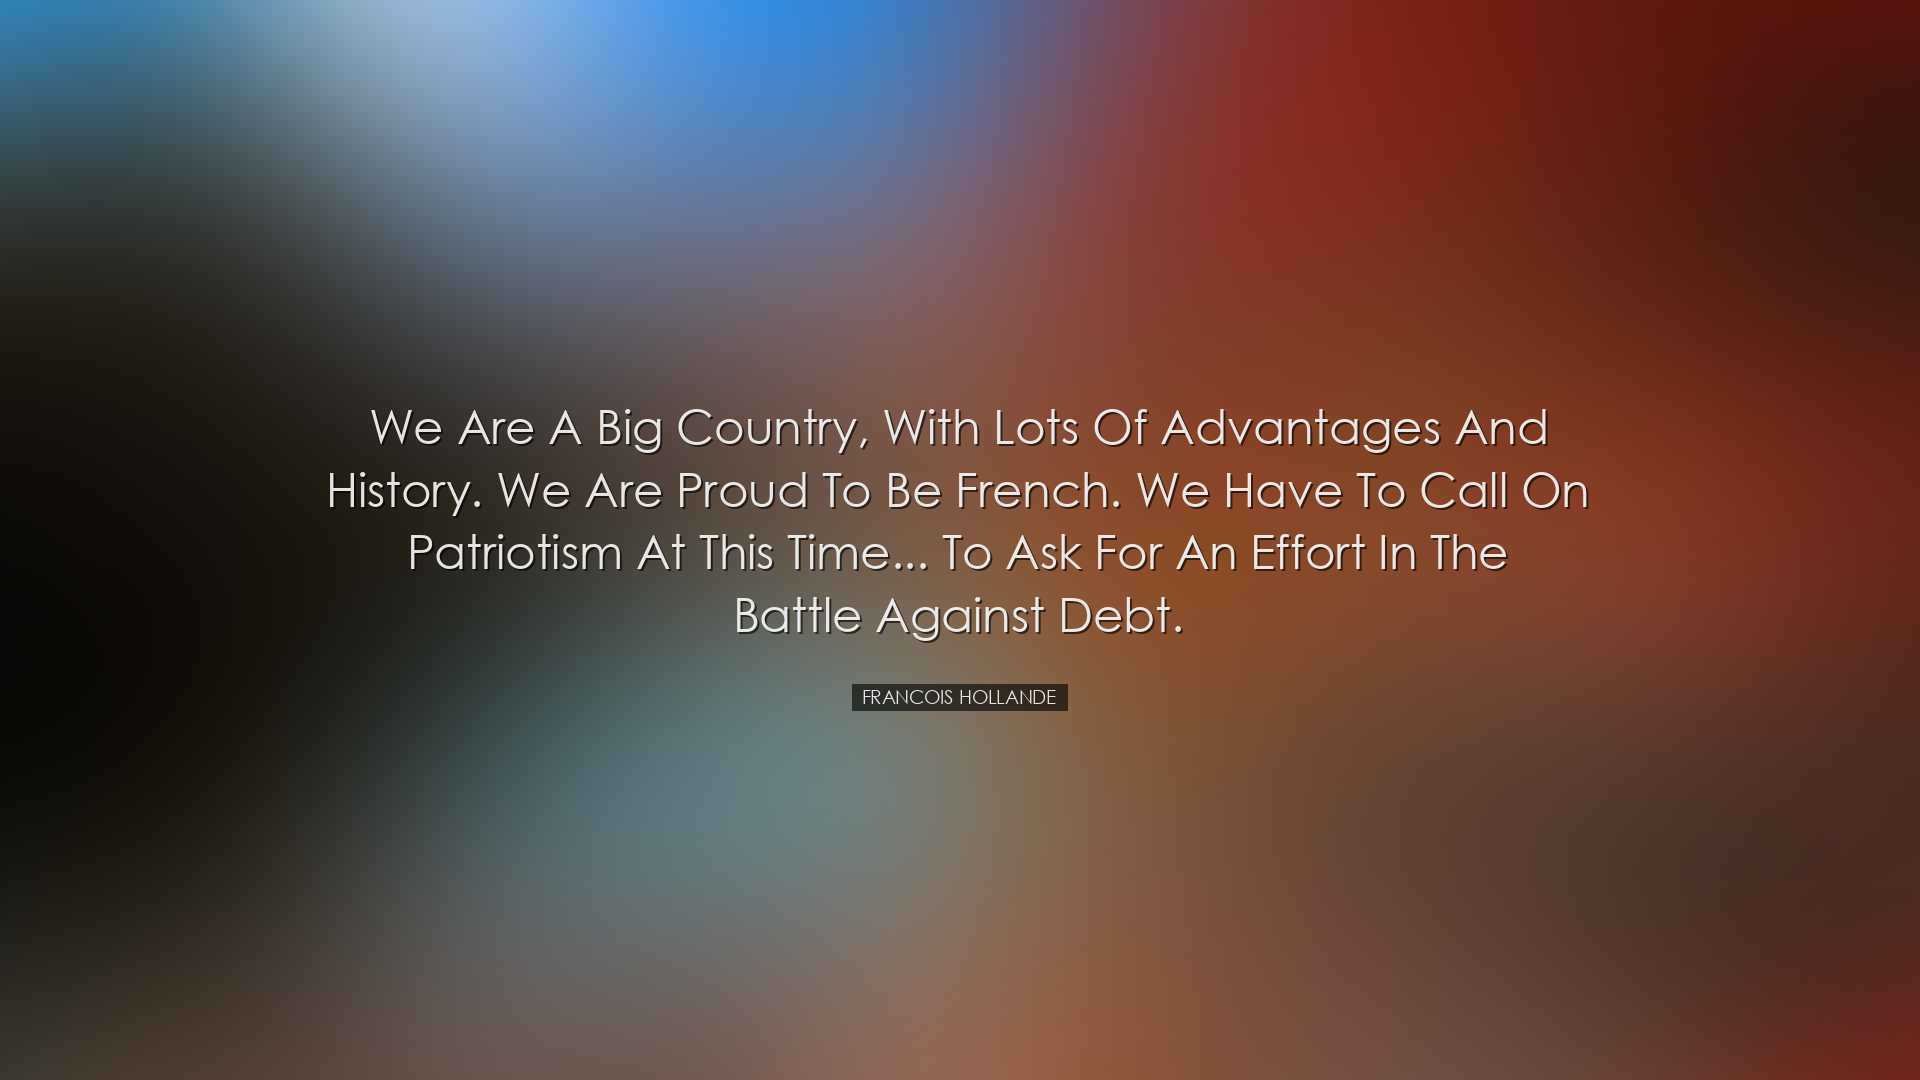 We are a big country, with lots of advantages and history. We are